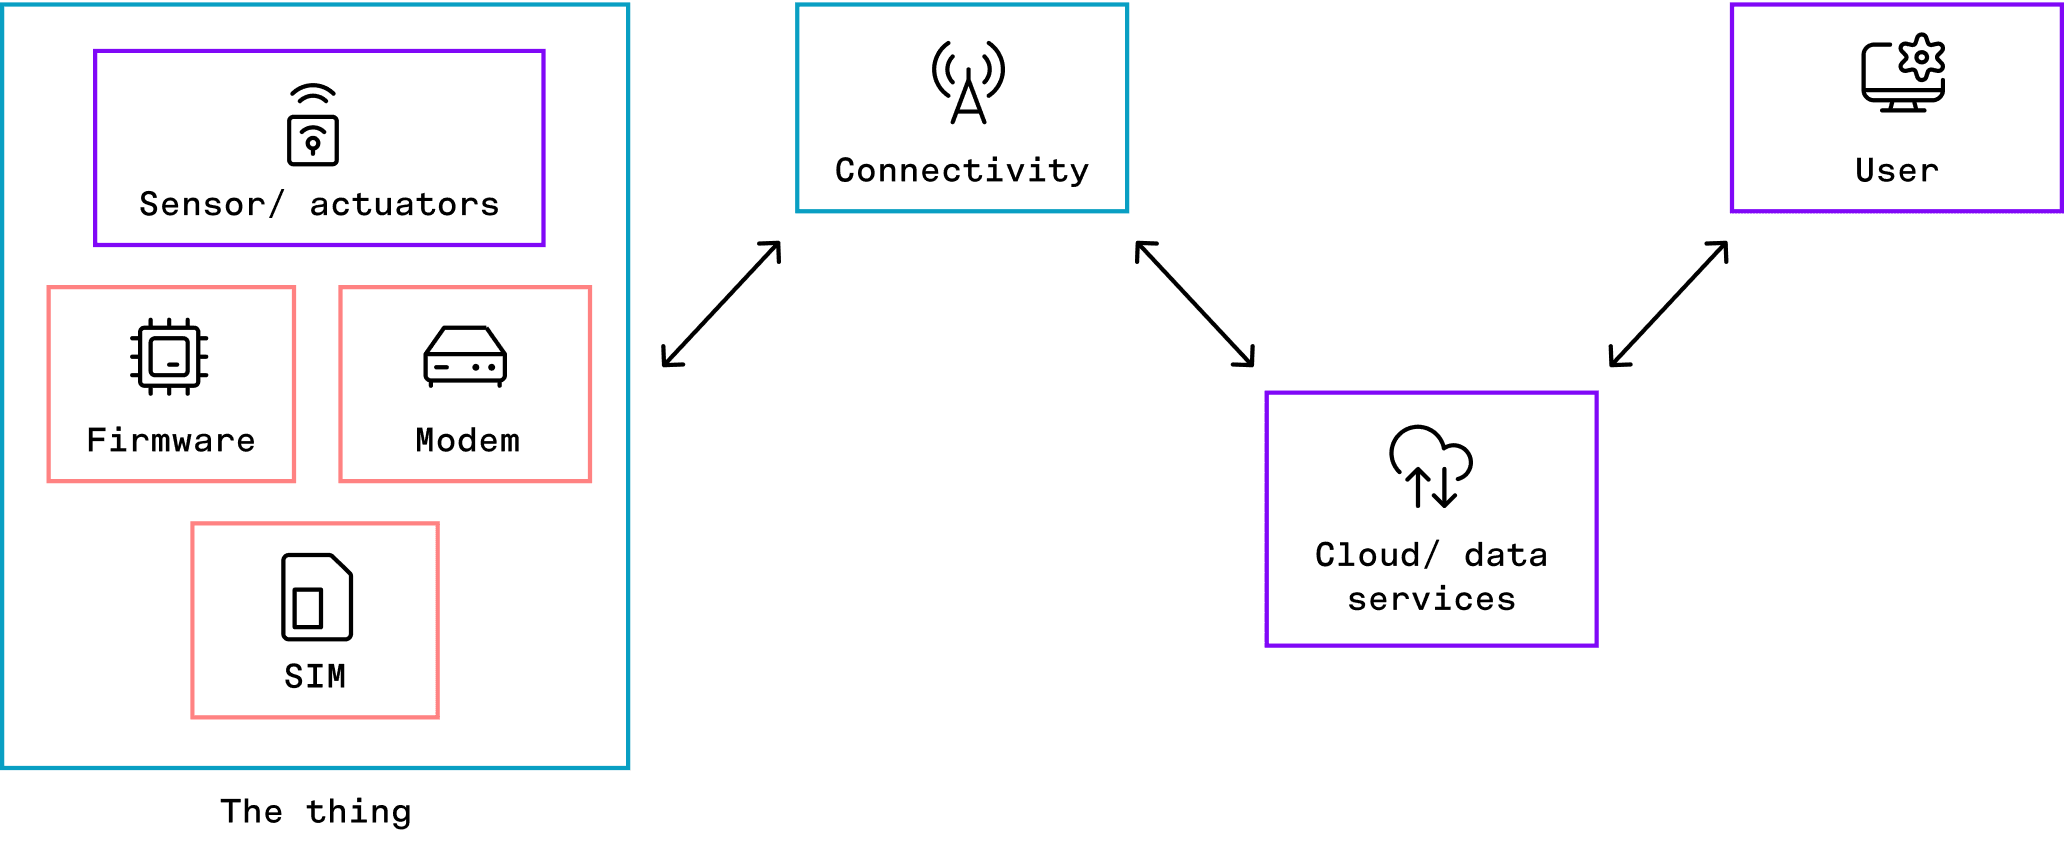 A diagram showing how a device connects and sends data 